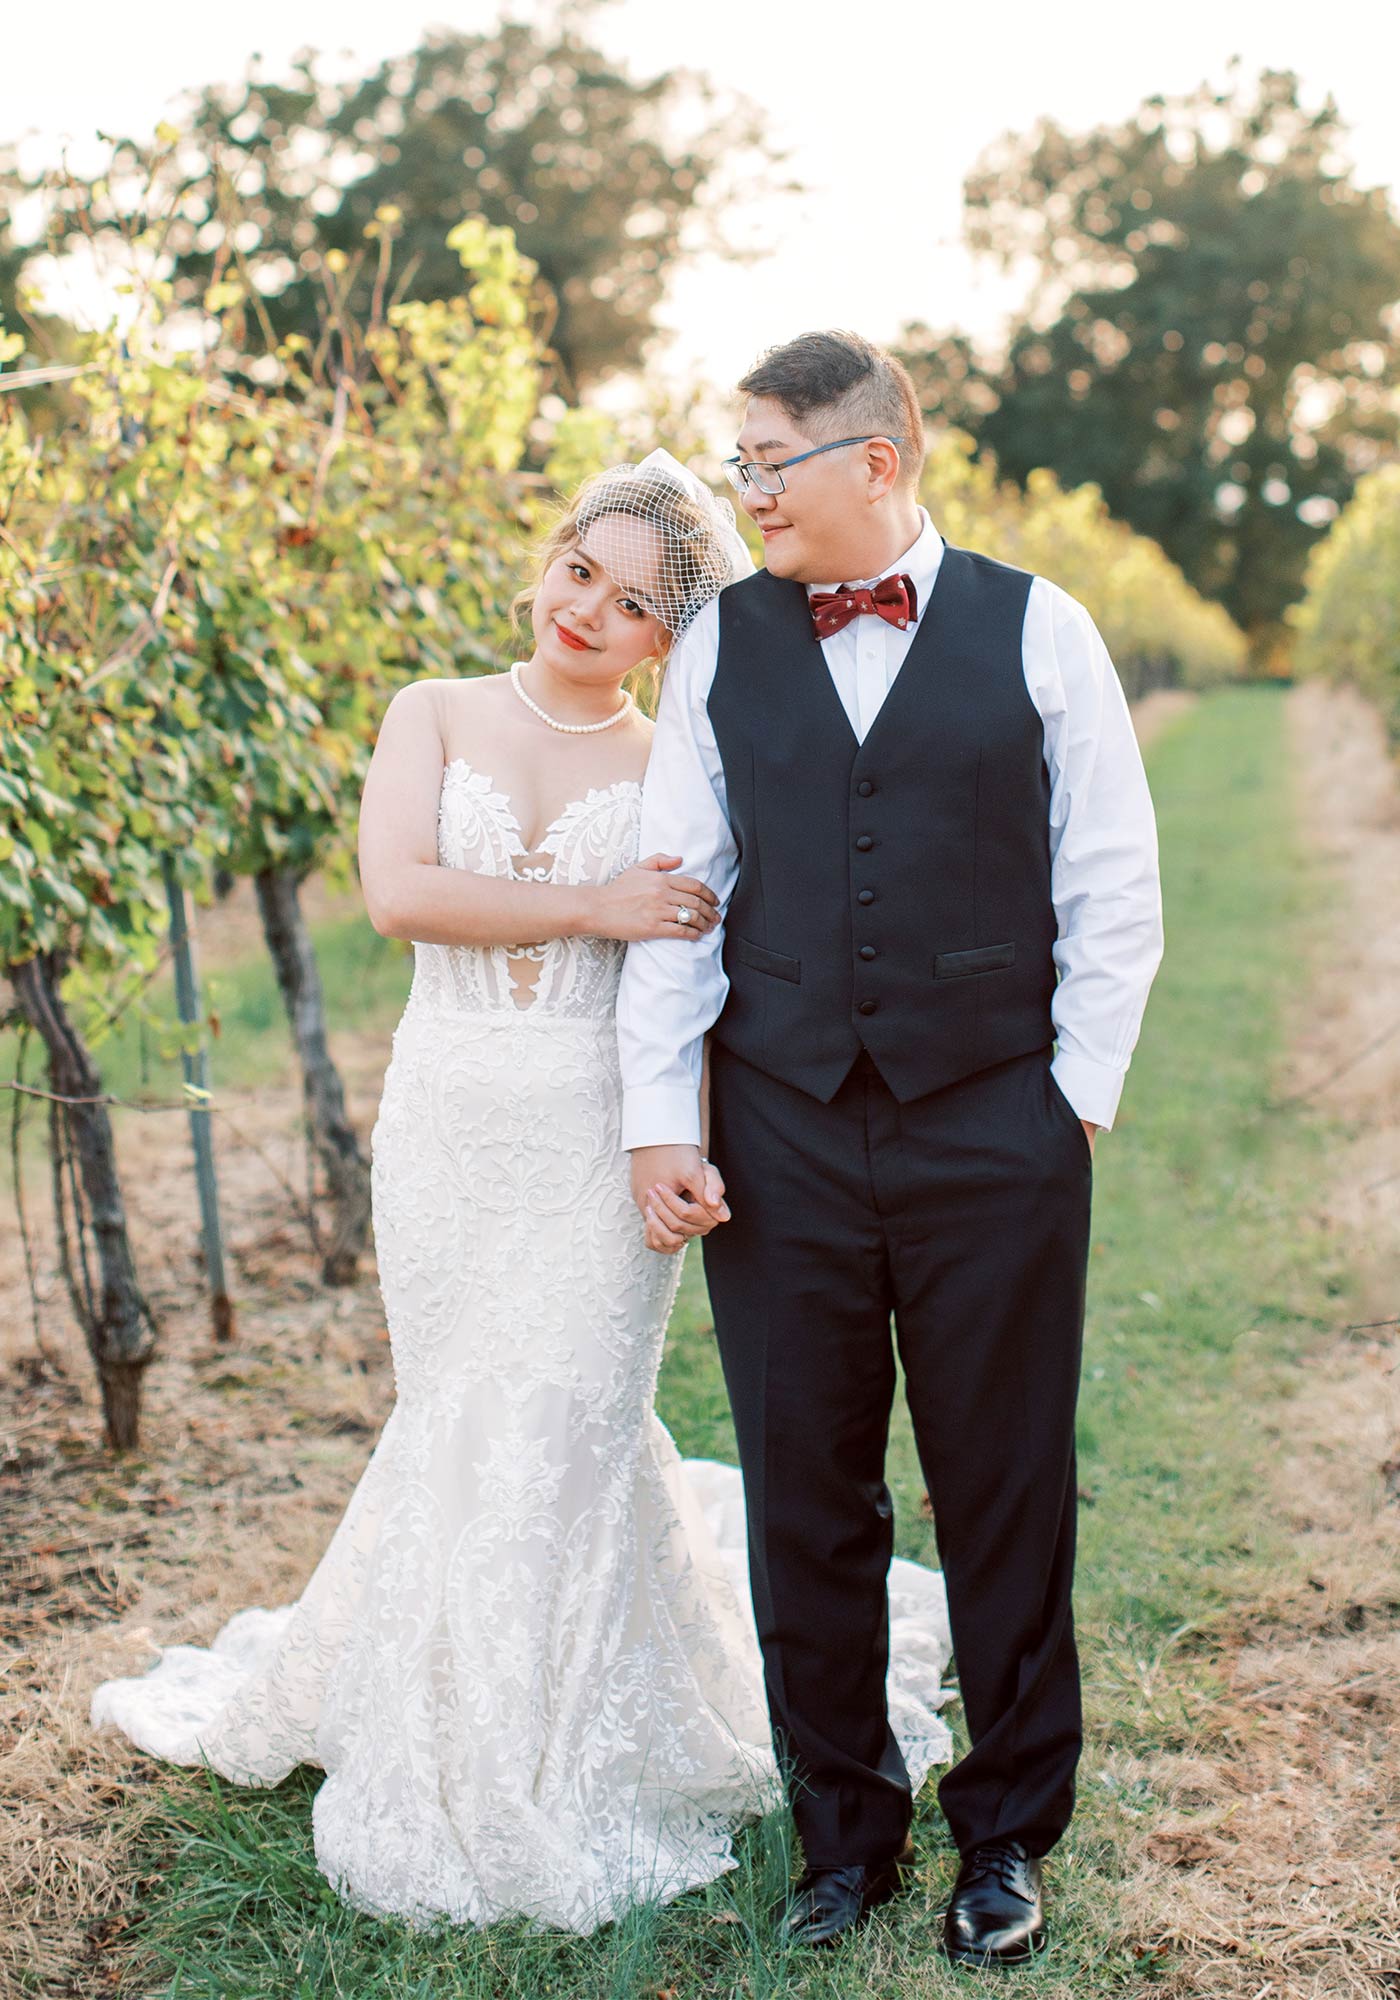 Keswick Vineyards, Blooming Wed, Allison Dash Photography, DJ FIT, The Aerialist Press, Blushtype Designs, Lexington Carriage Company, MS Events, Latavola Linen, Blooming Wed, Travel House Collective, The Catering Outfit, Belinda Ni, Cake By Rachel